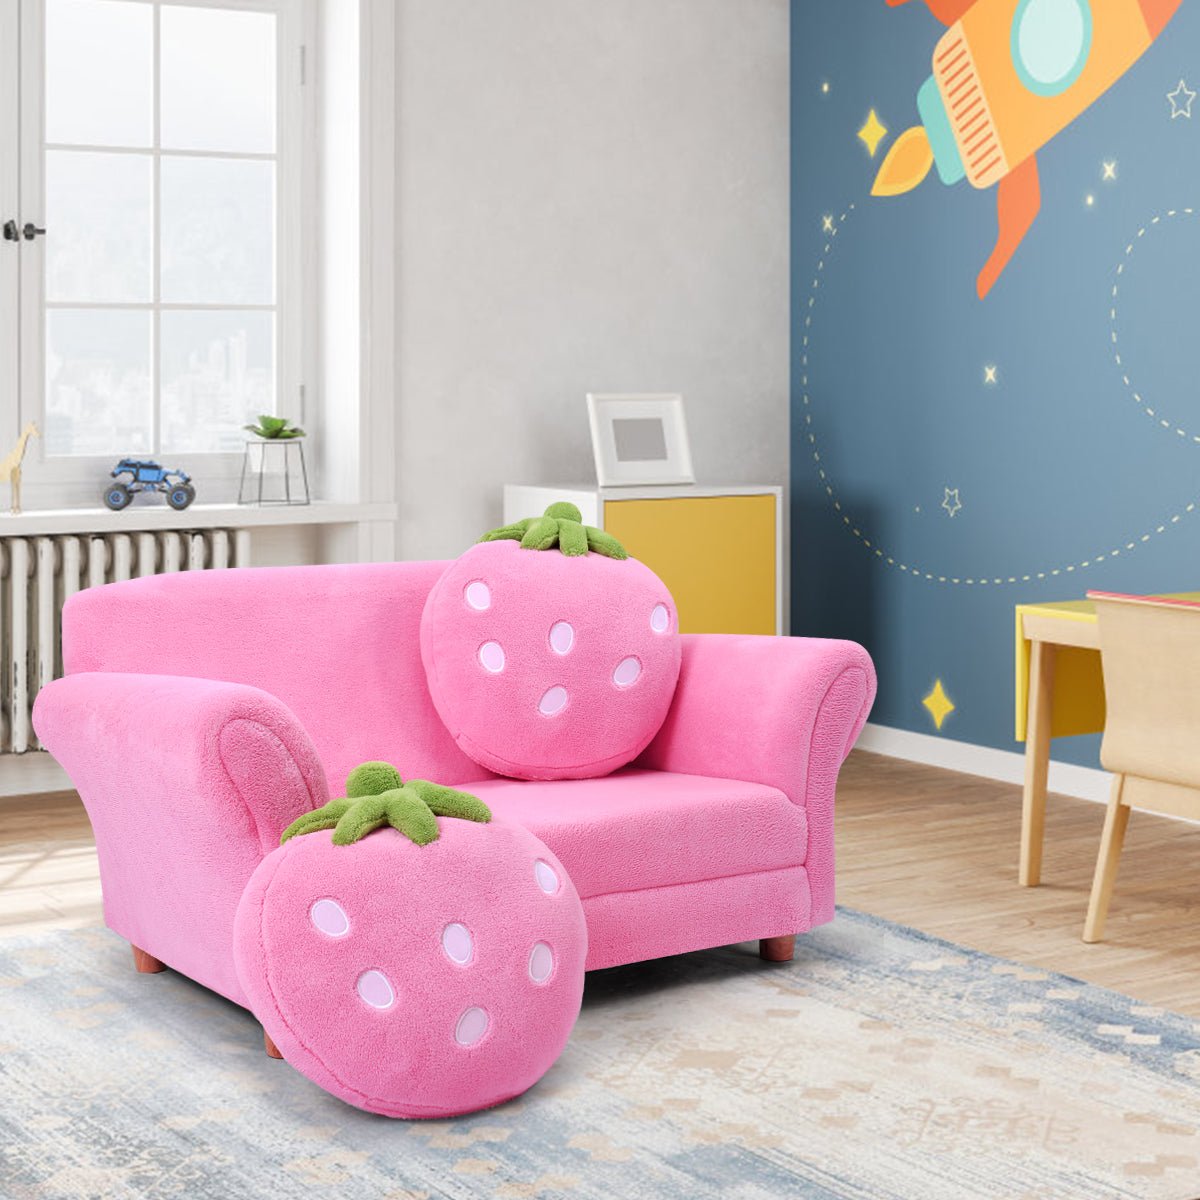 2-Seat Kids Sofa: Cozy Lounge Bed with Adorable Strawberry Pillows